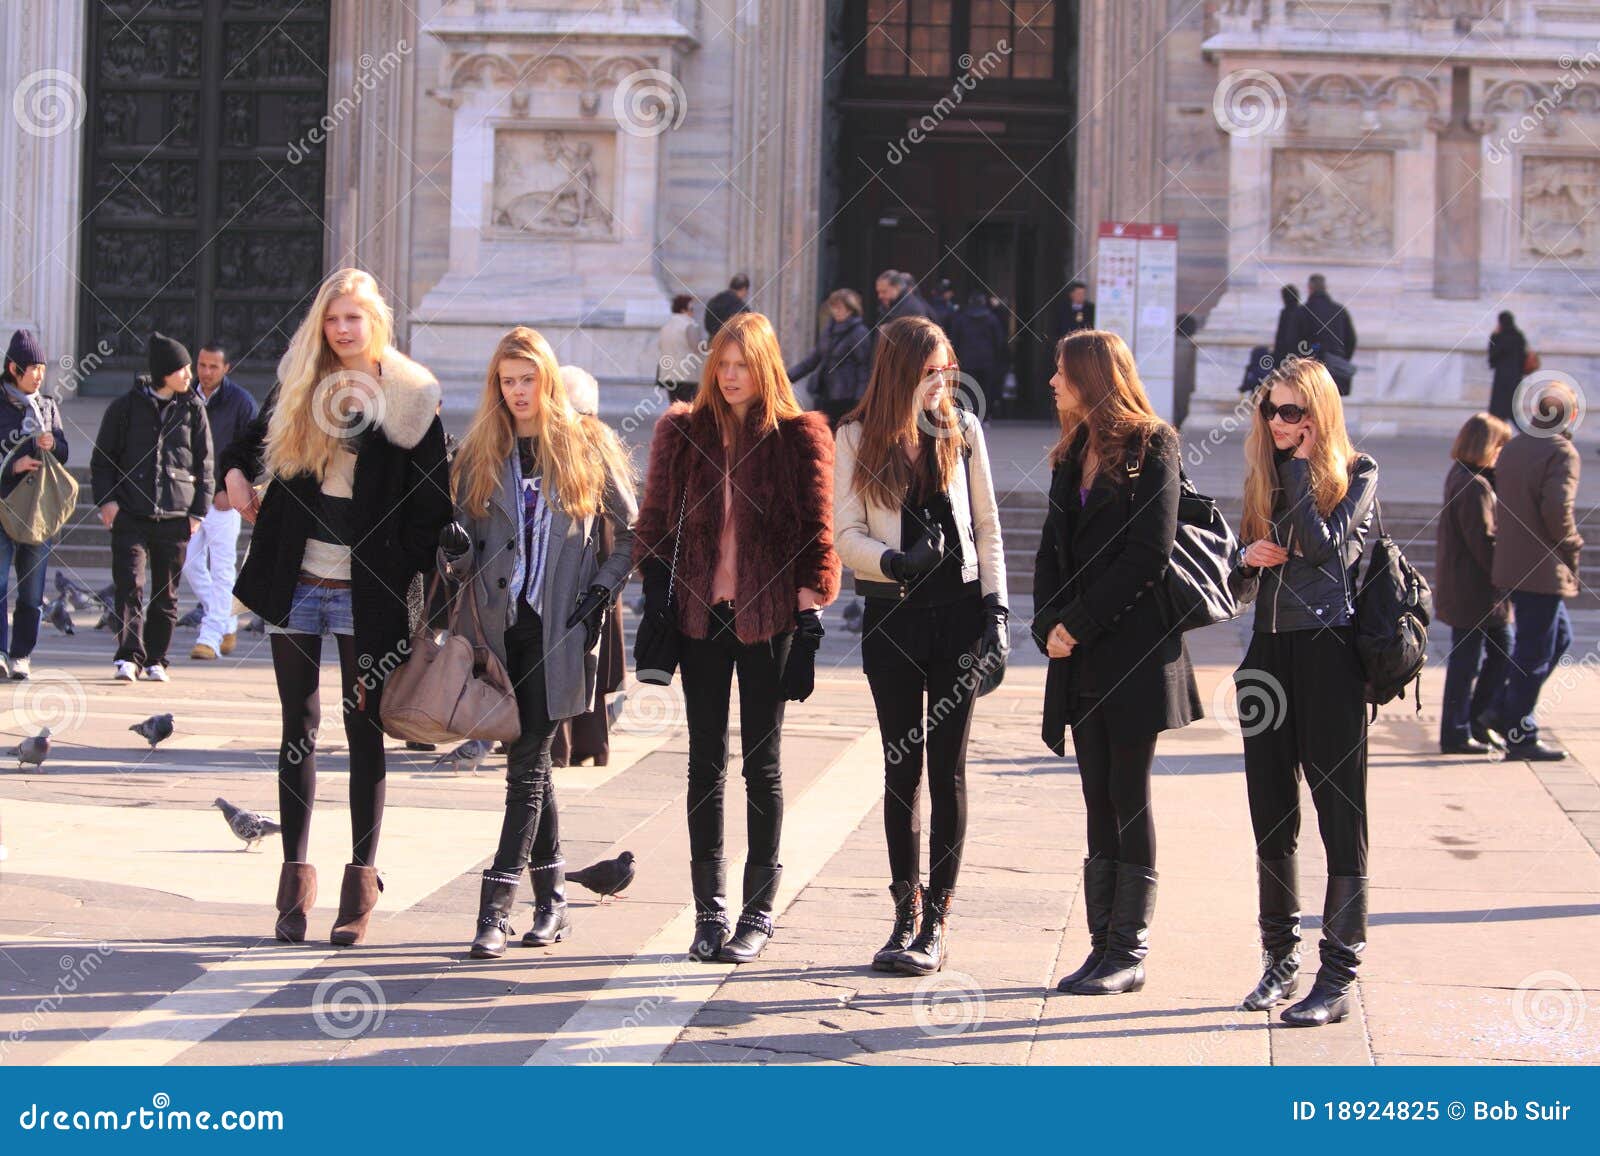 Models Backstage Off Duty in the Street Milan Editorial Image ...